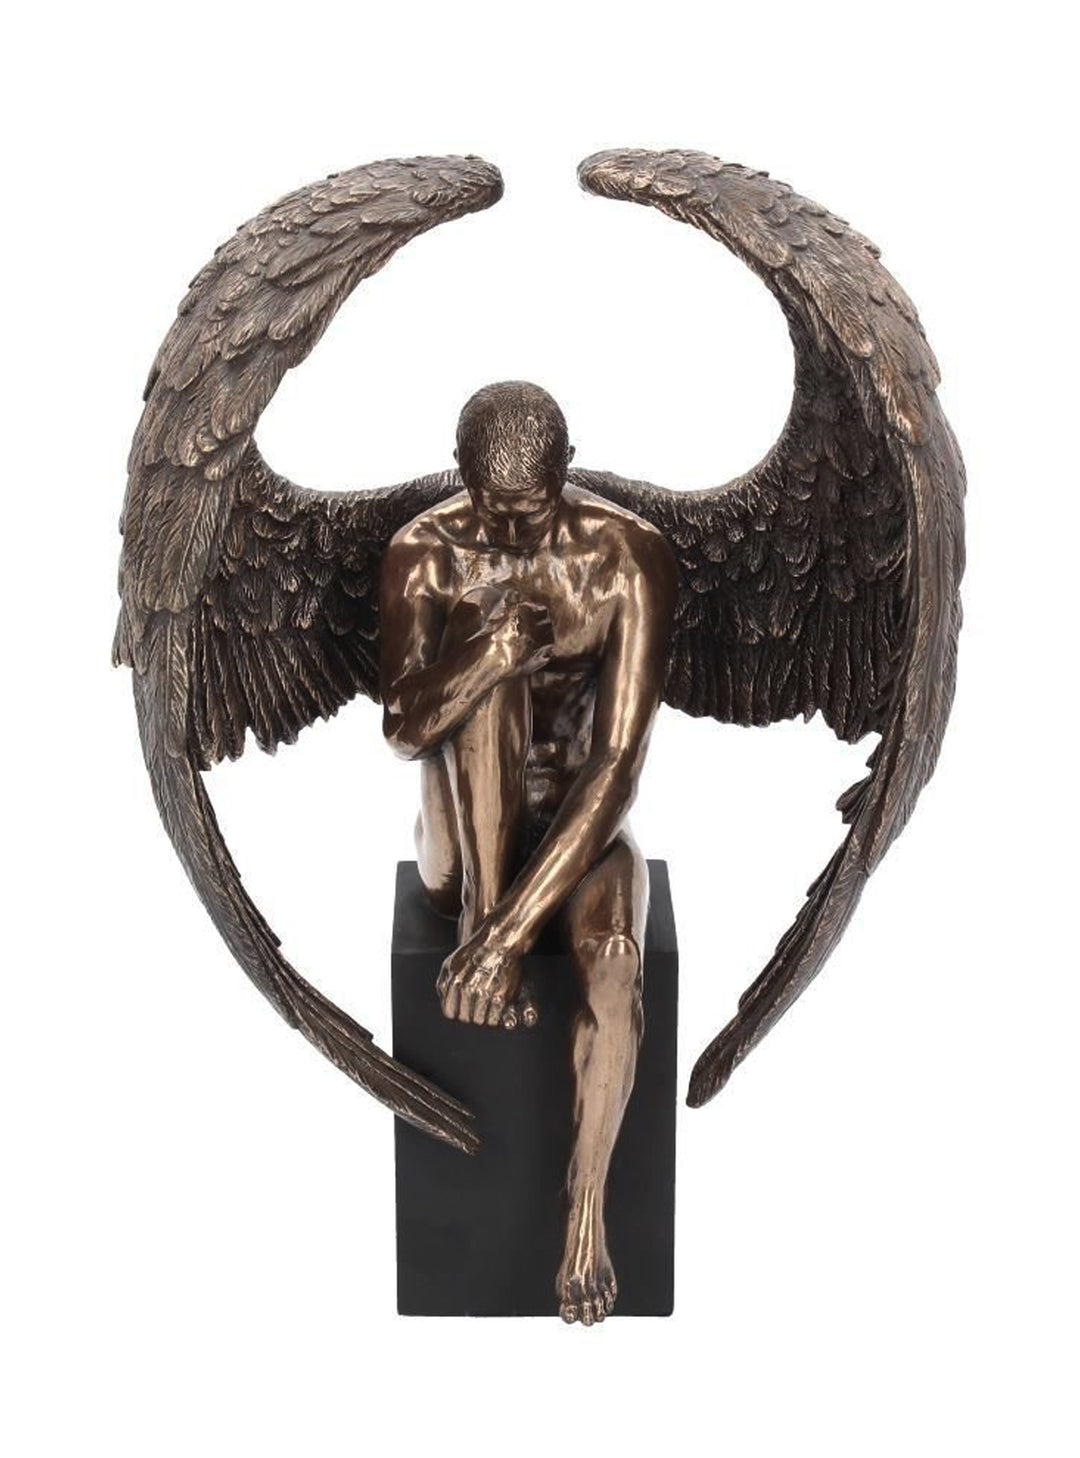 Angel Man, Man with Wing Back, Angel Wing Man Statue, Bronze Plated statue